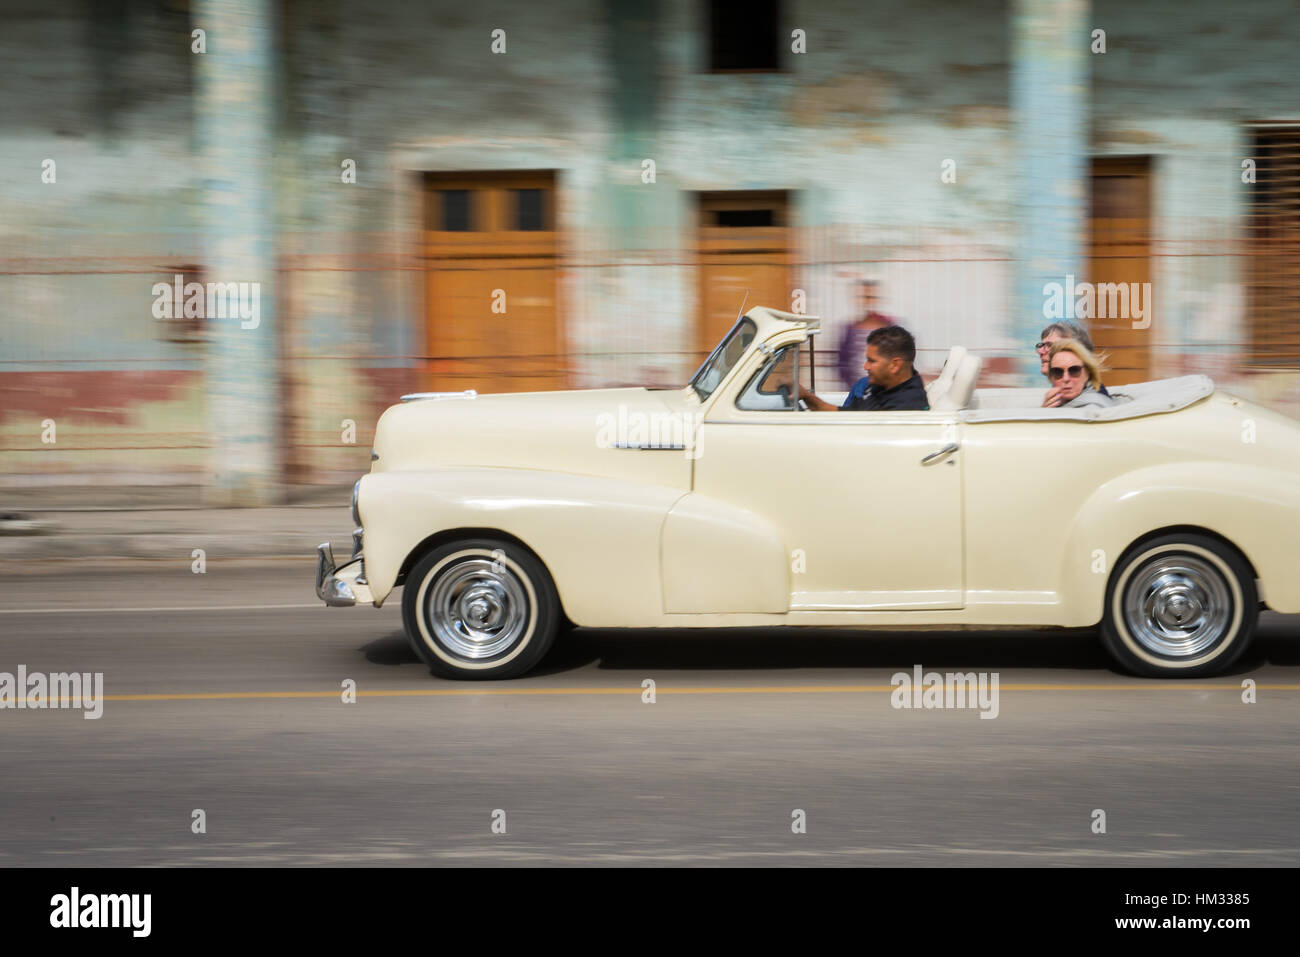 Driving in an old classic American convertible car in old Havana, Cuba Stock Photo